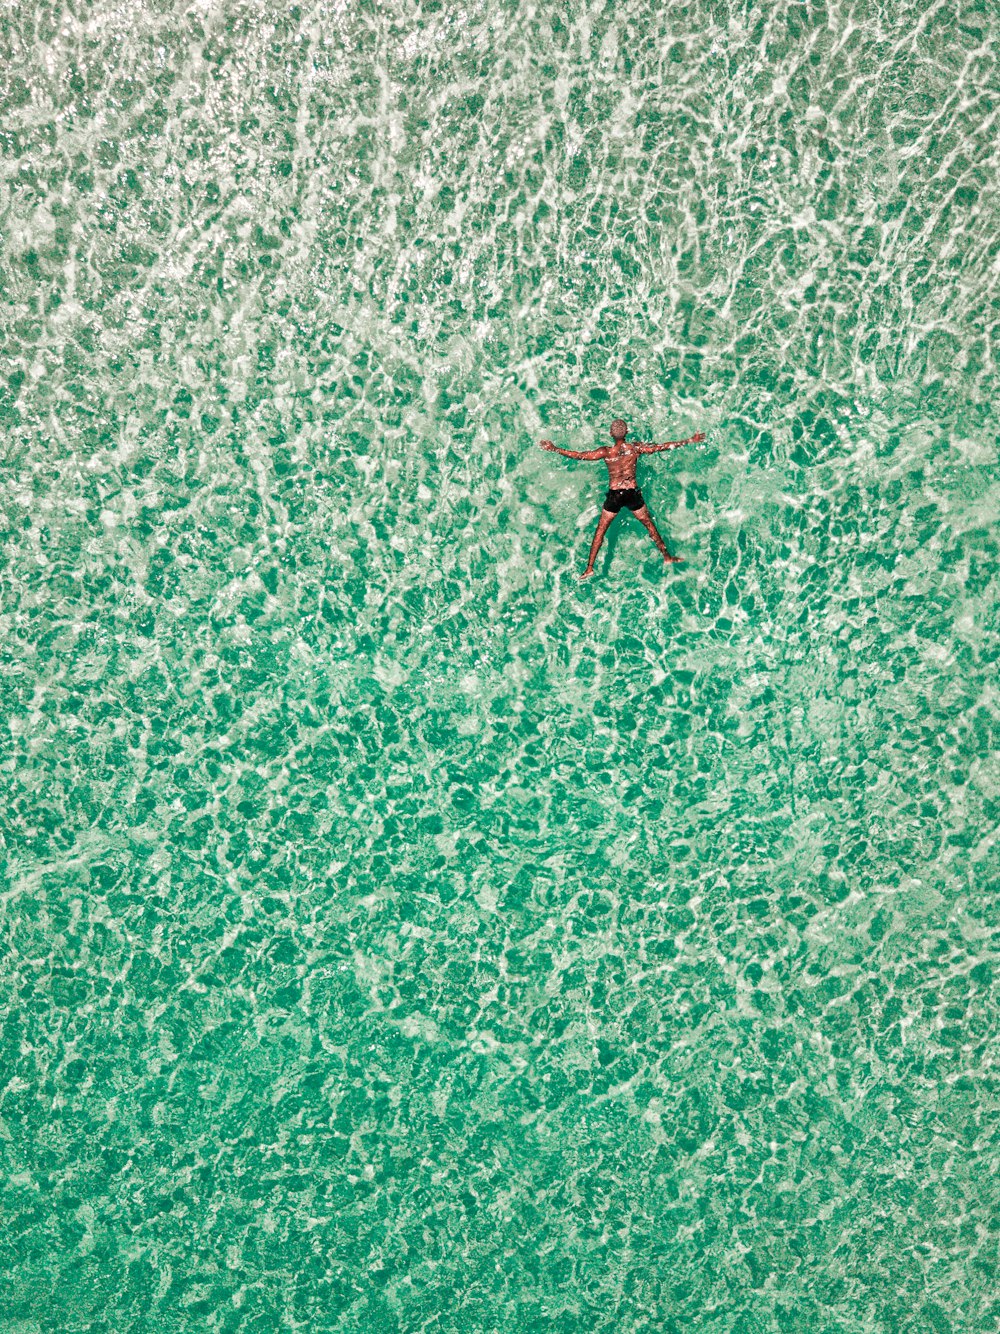 a man is swimming in the ocean on a surfboard